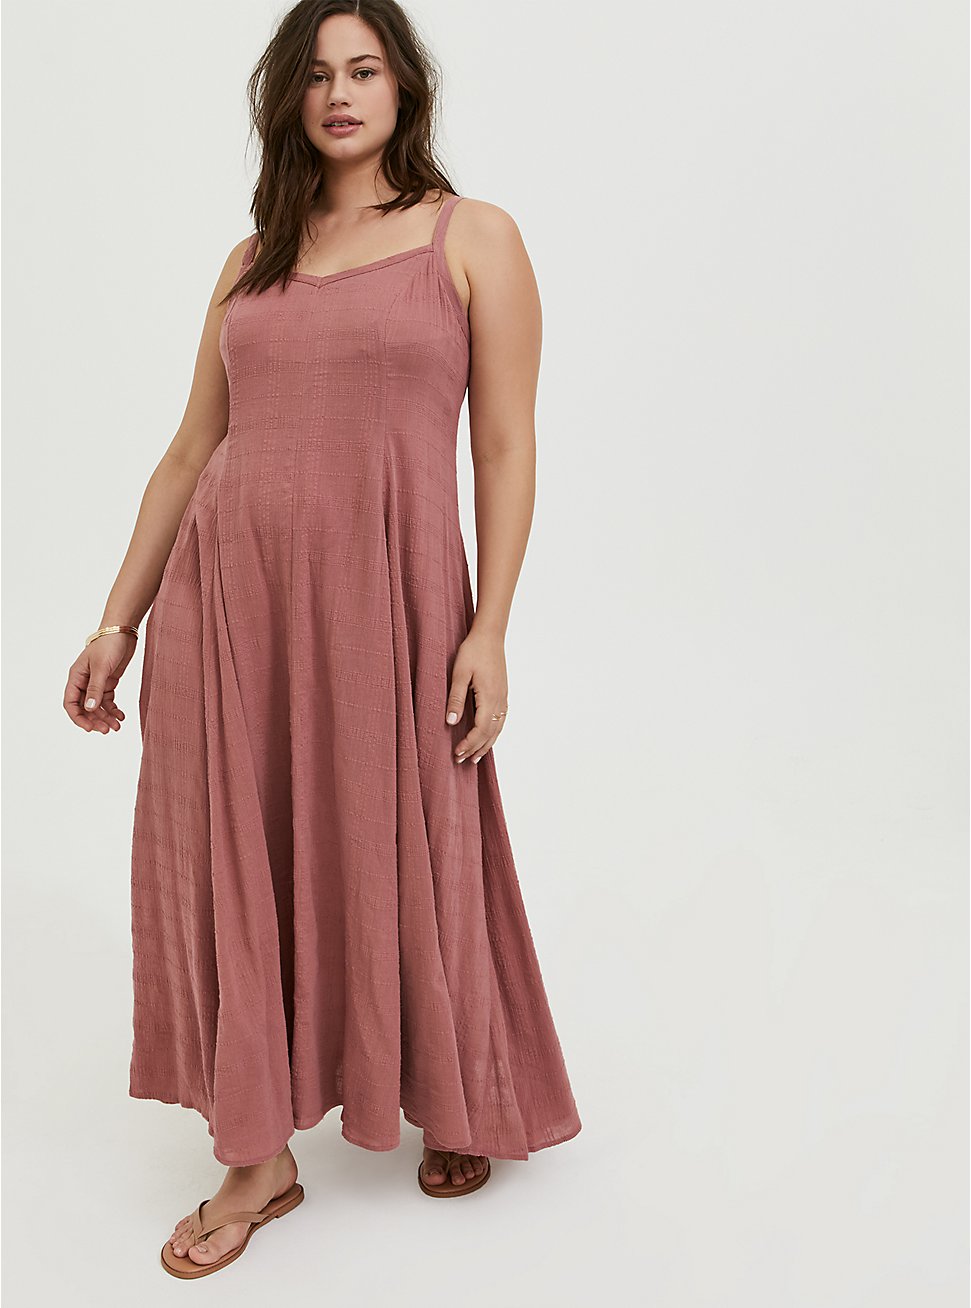 Dusty Rose Textured Trapeze Maxi Dress ...